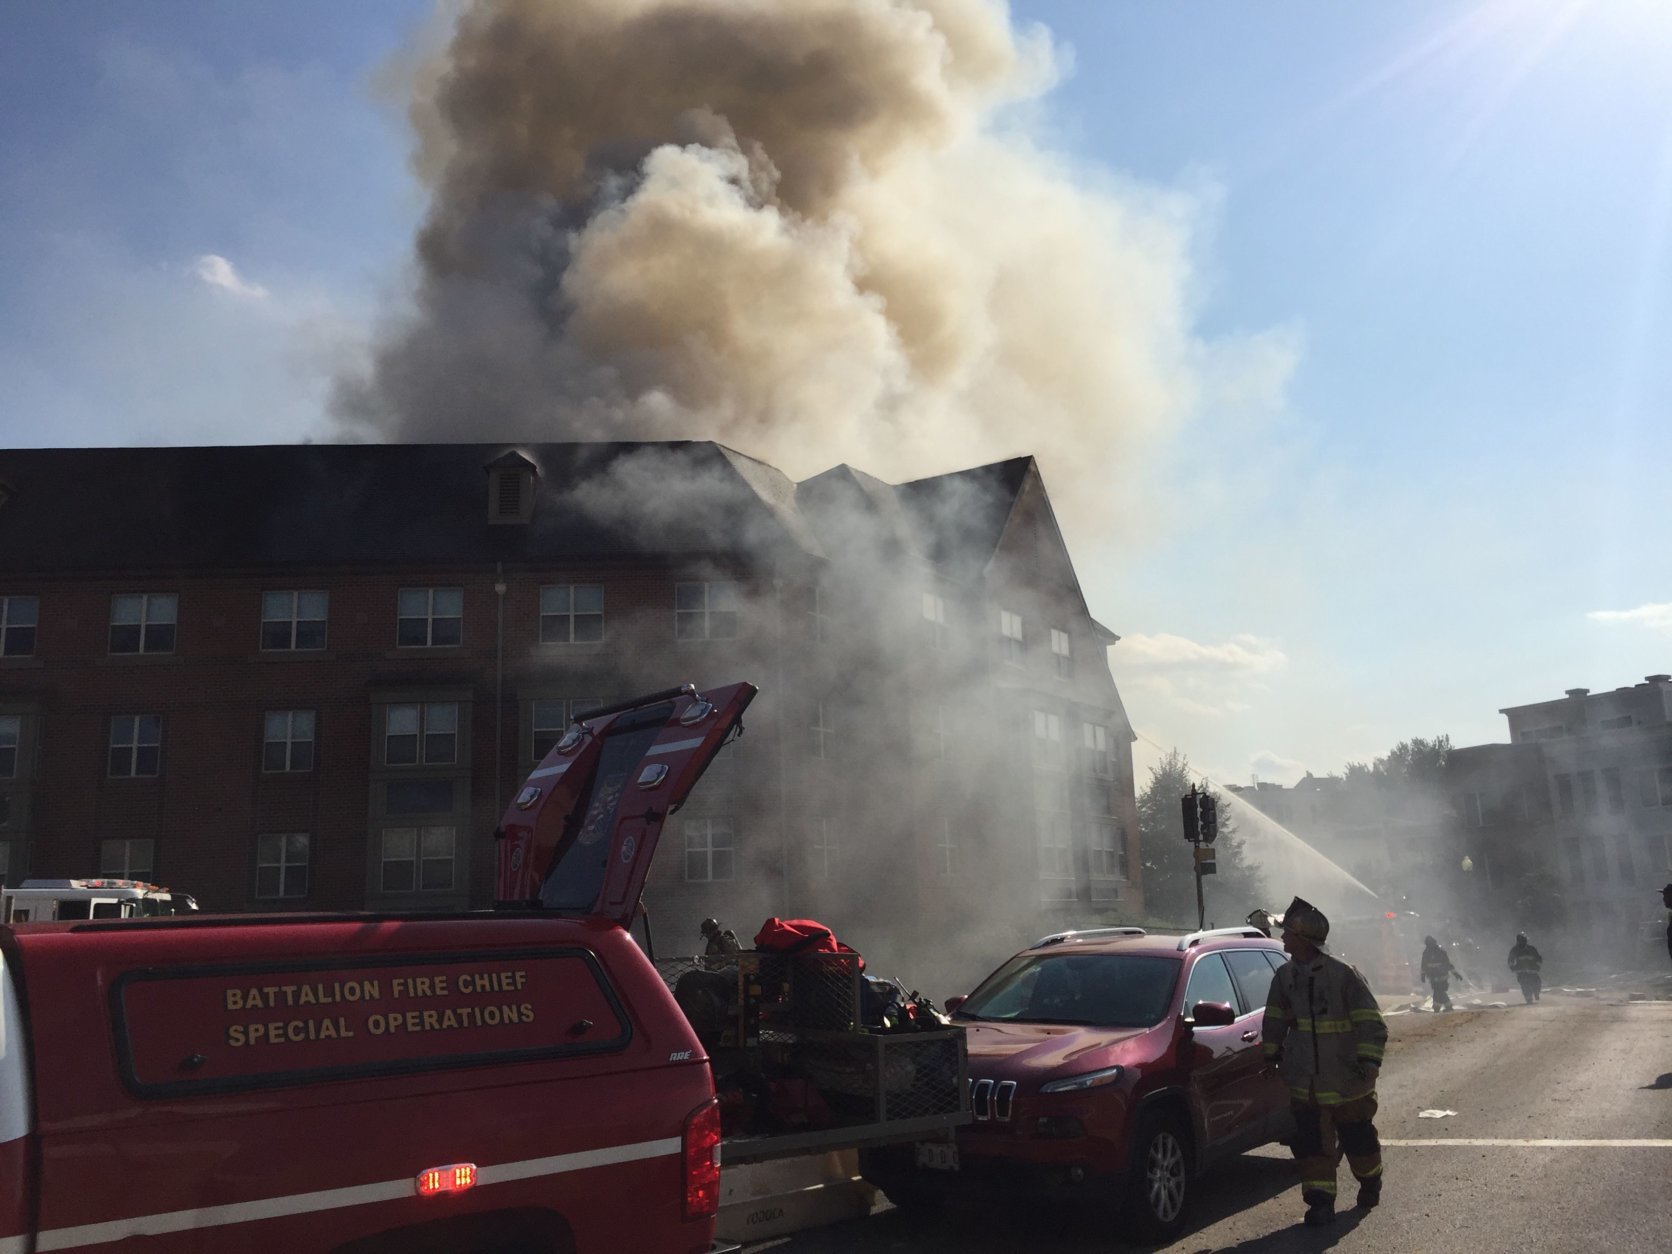 Multiple fire companies battle a two-alarm fire in a five-story apartment building in Southeast D.C. that houses senior citizens. (Courtesy Nicky Sundt)